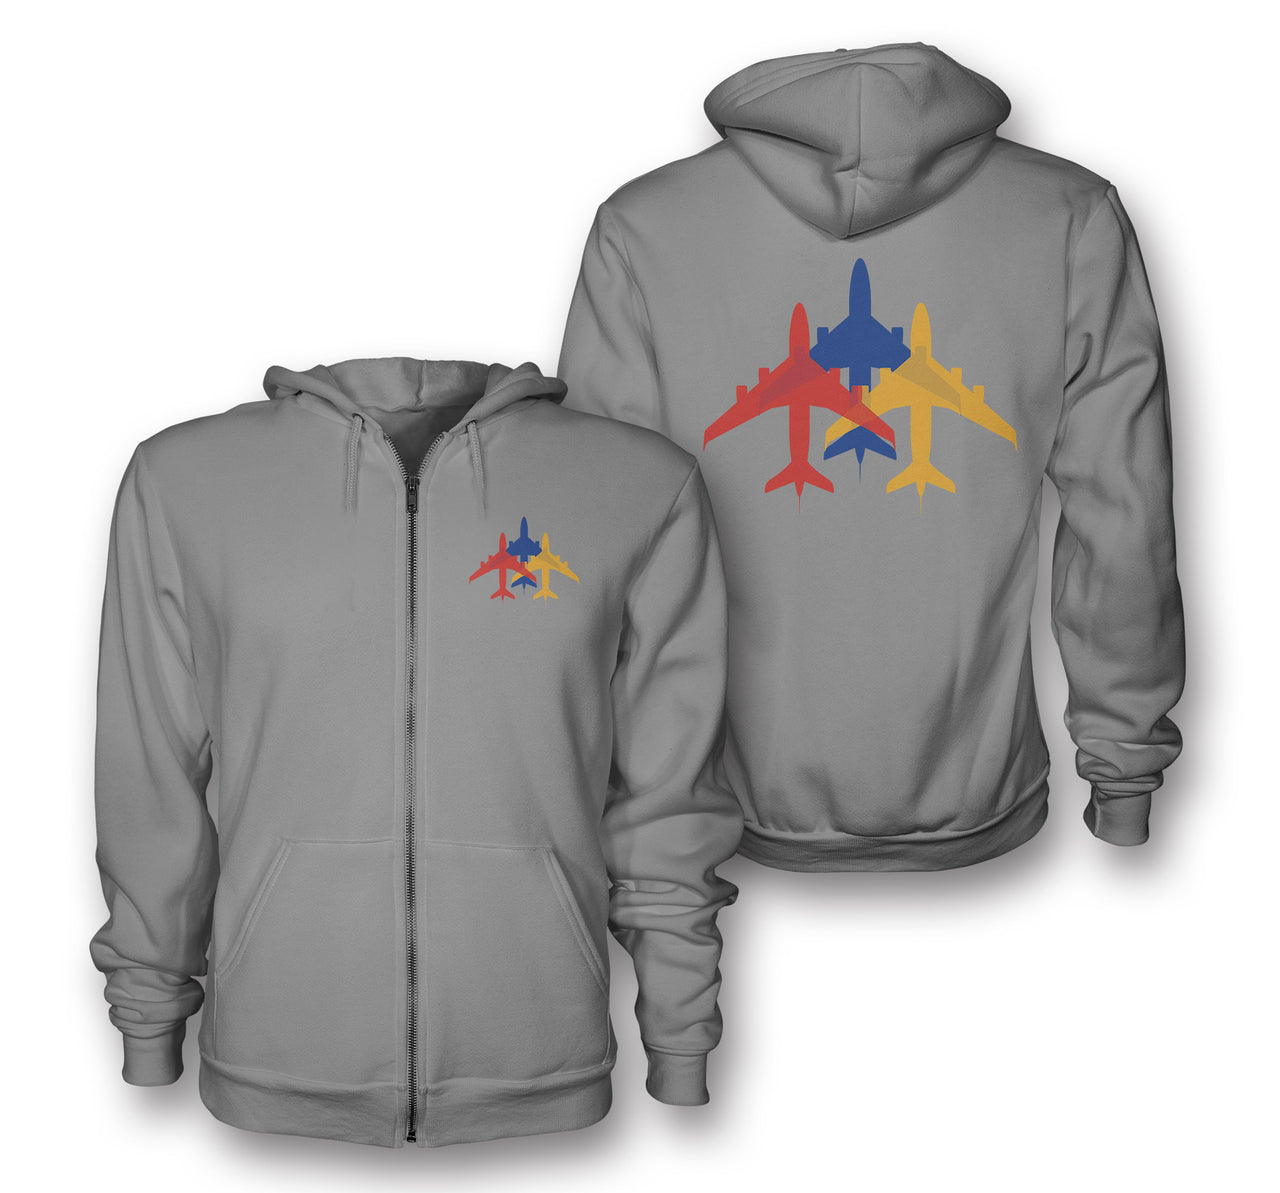 Colourful 3 Airplanes Designed Zipped Hoodies